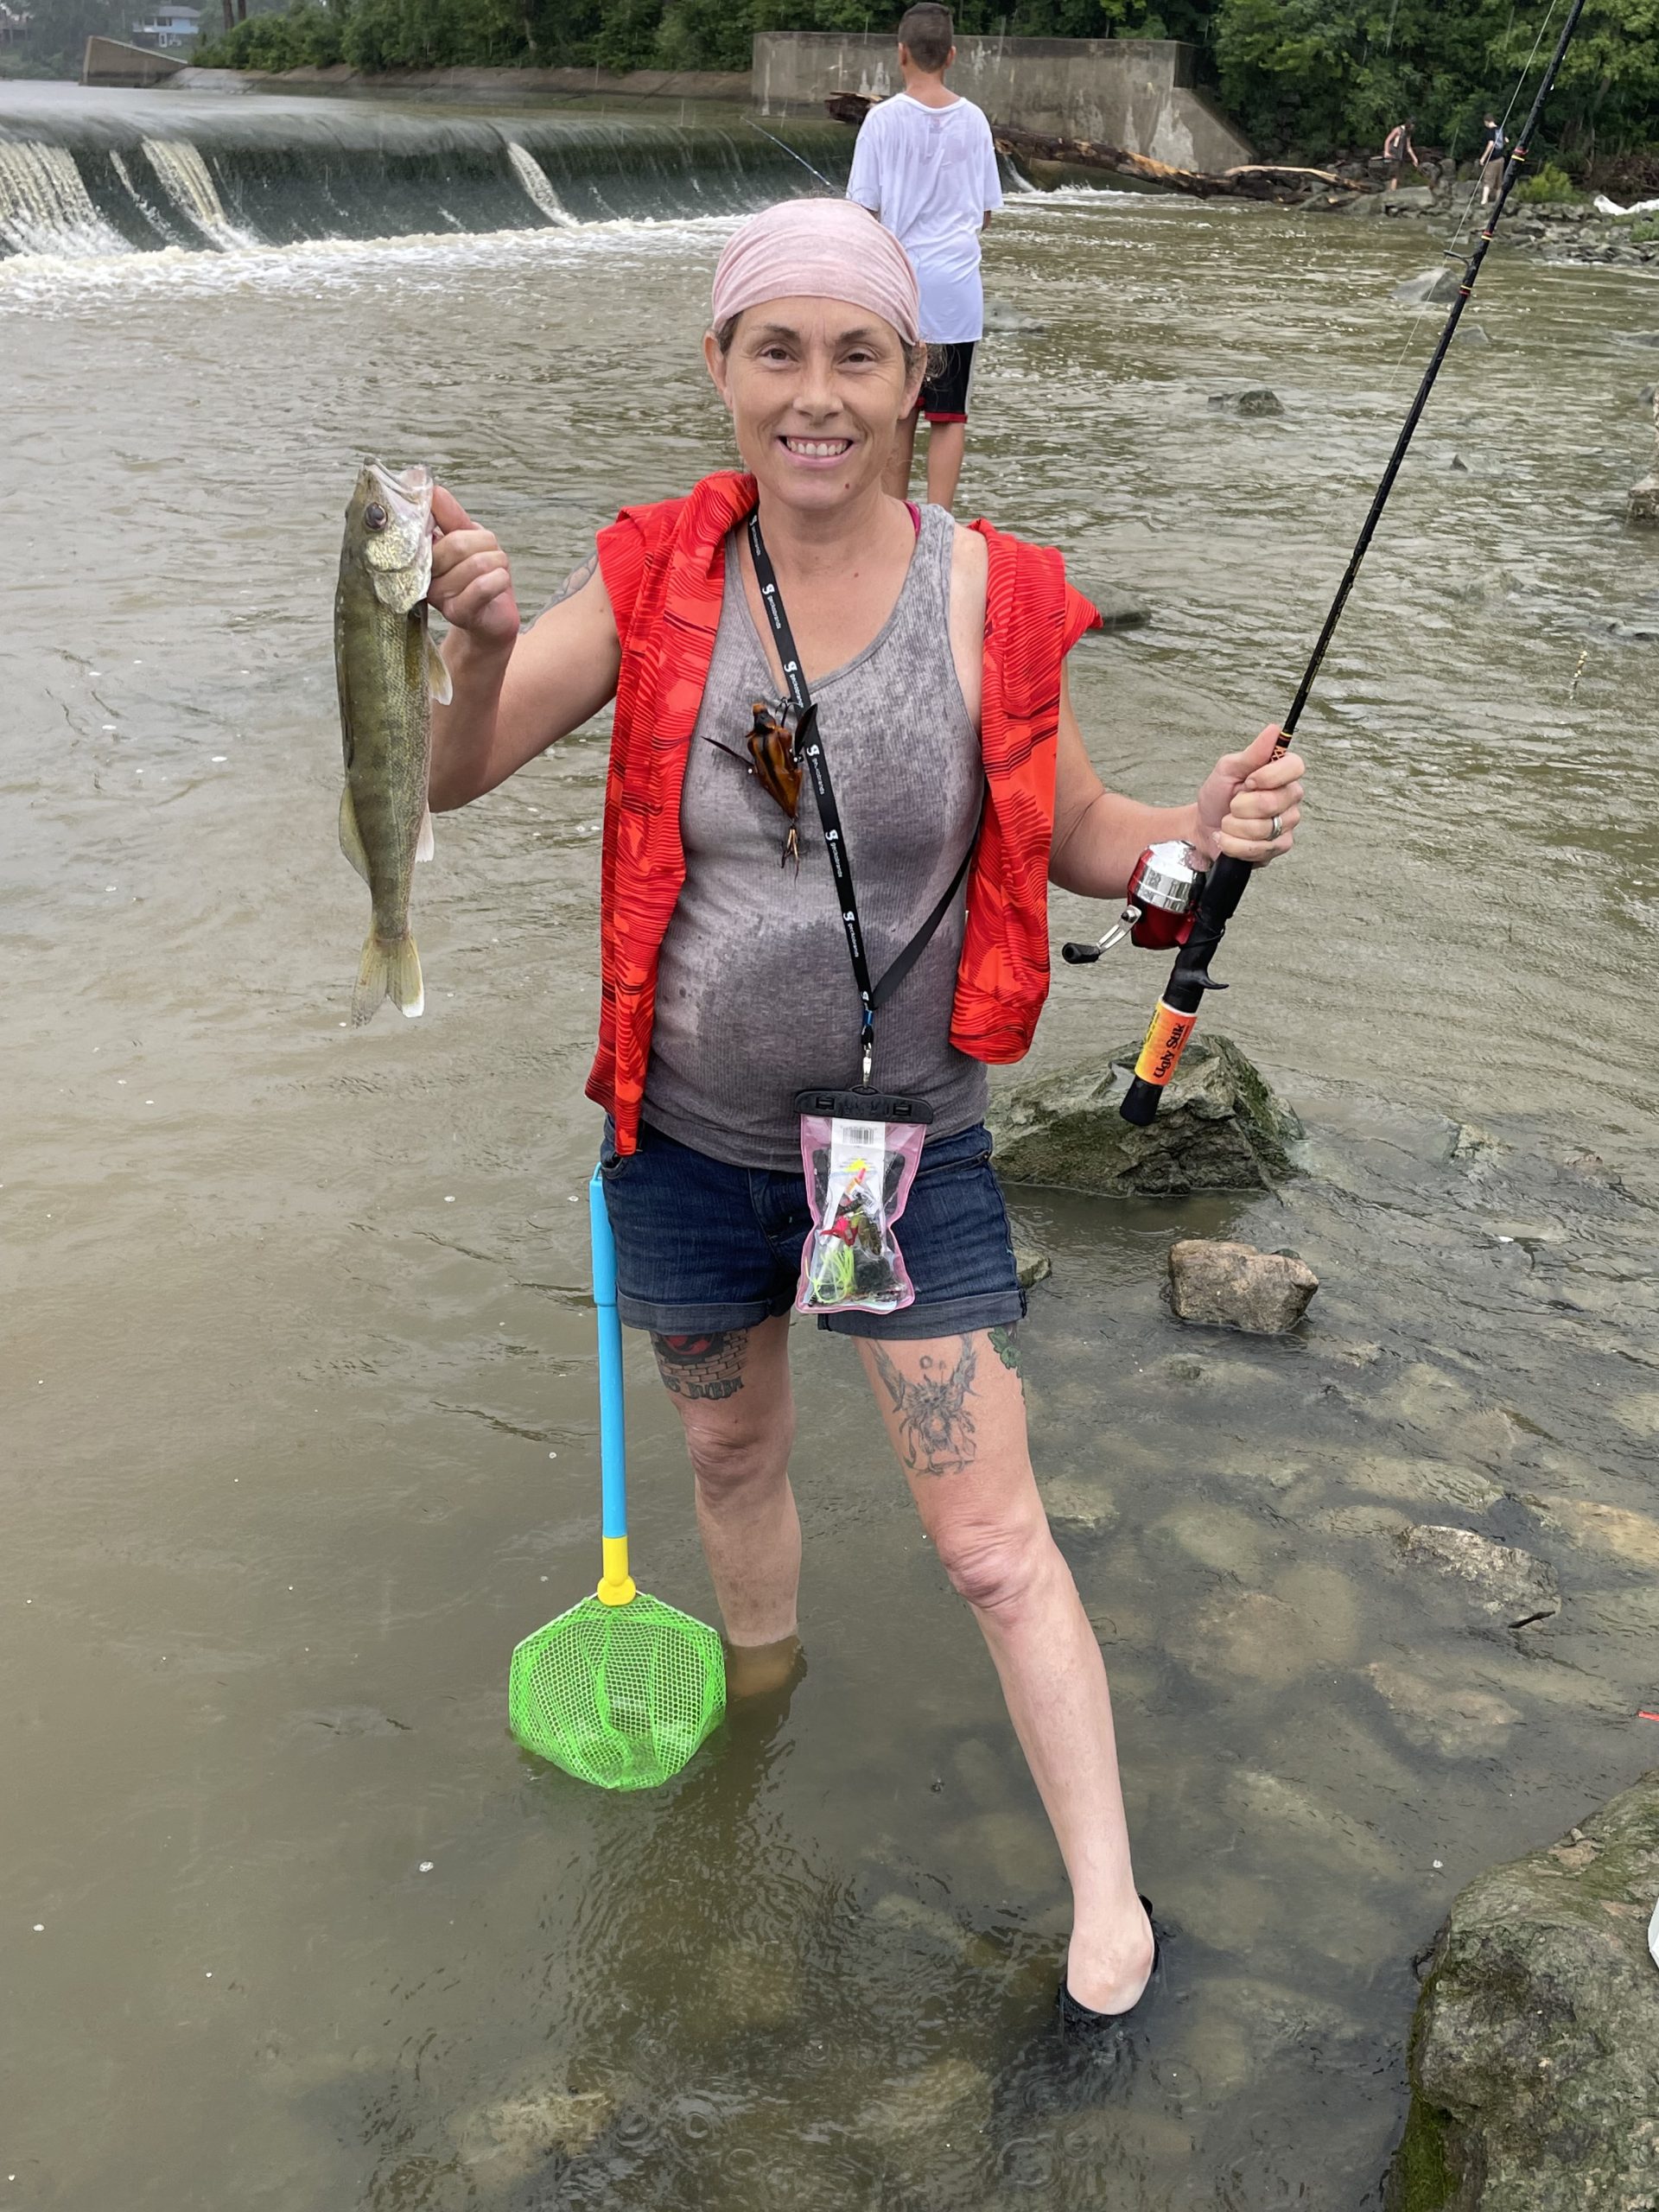 maumee river report- july 24, 2022